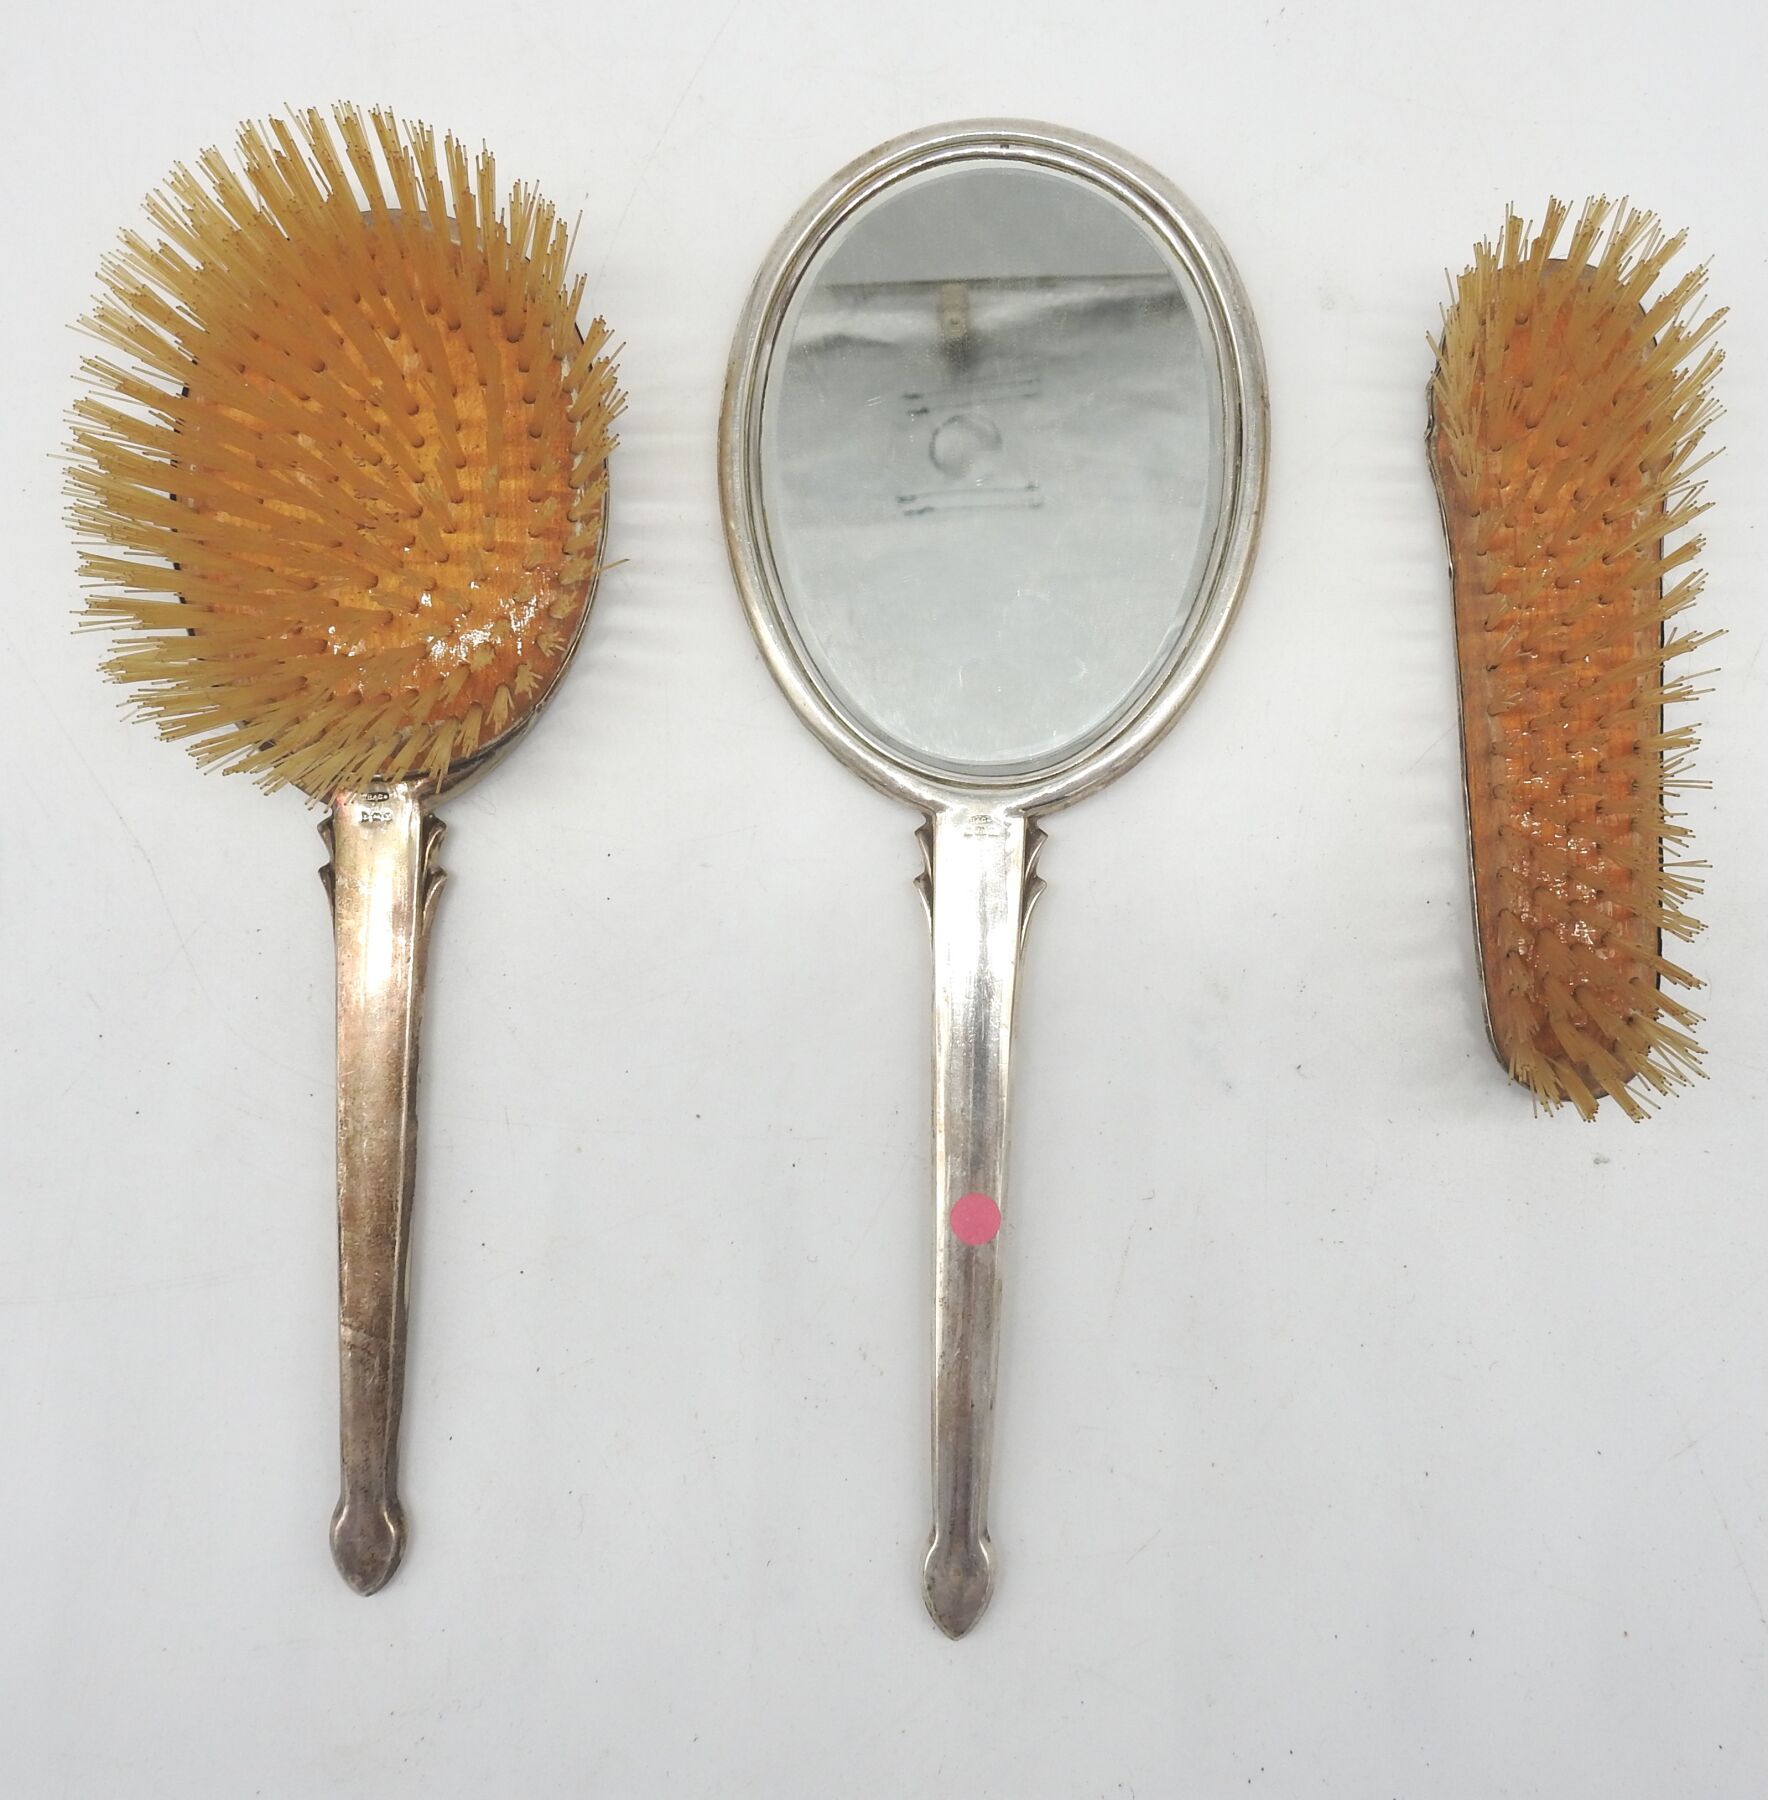 Null LOT of English silver three pieces including two brushes and a mirror